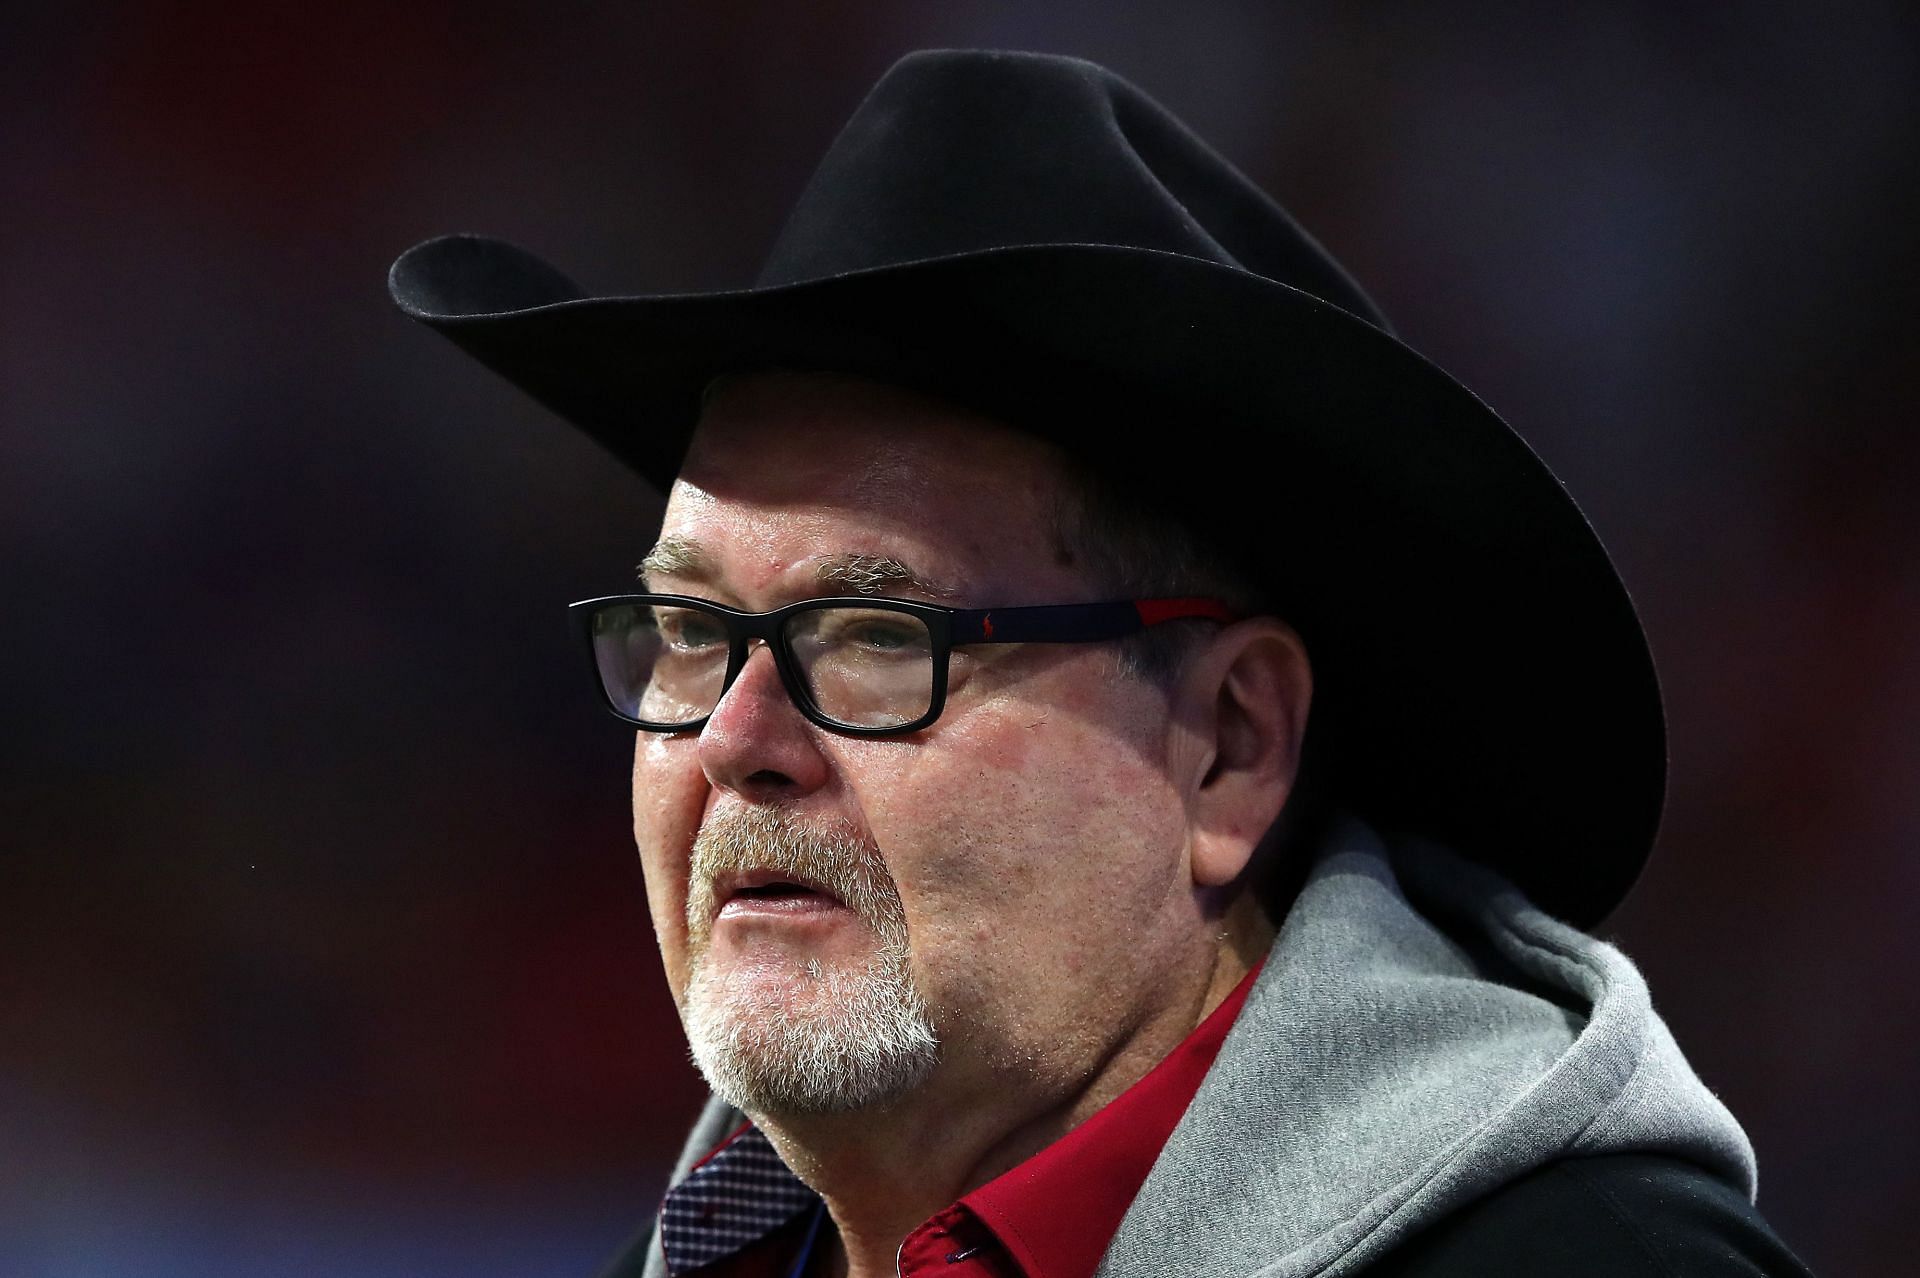 "I miss being on Dynamite" Jim Ross sheds light on his future with AEW